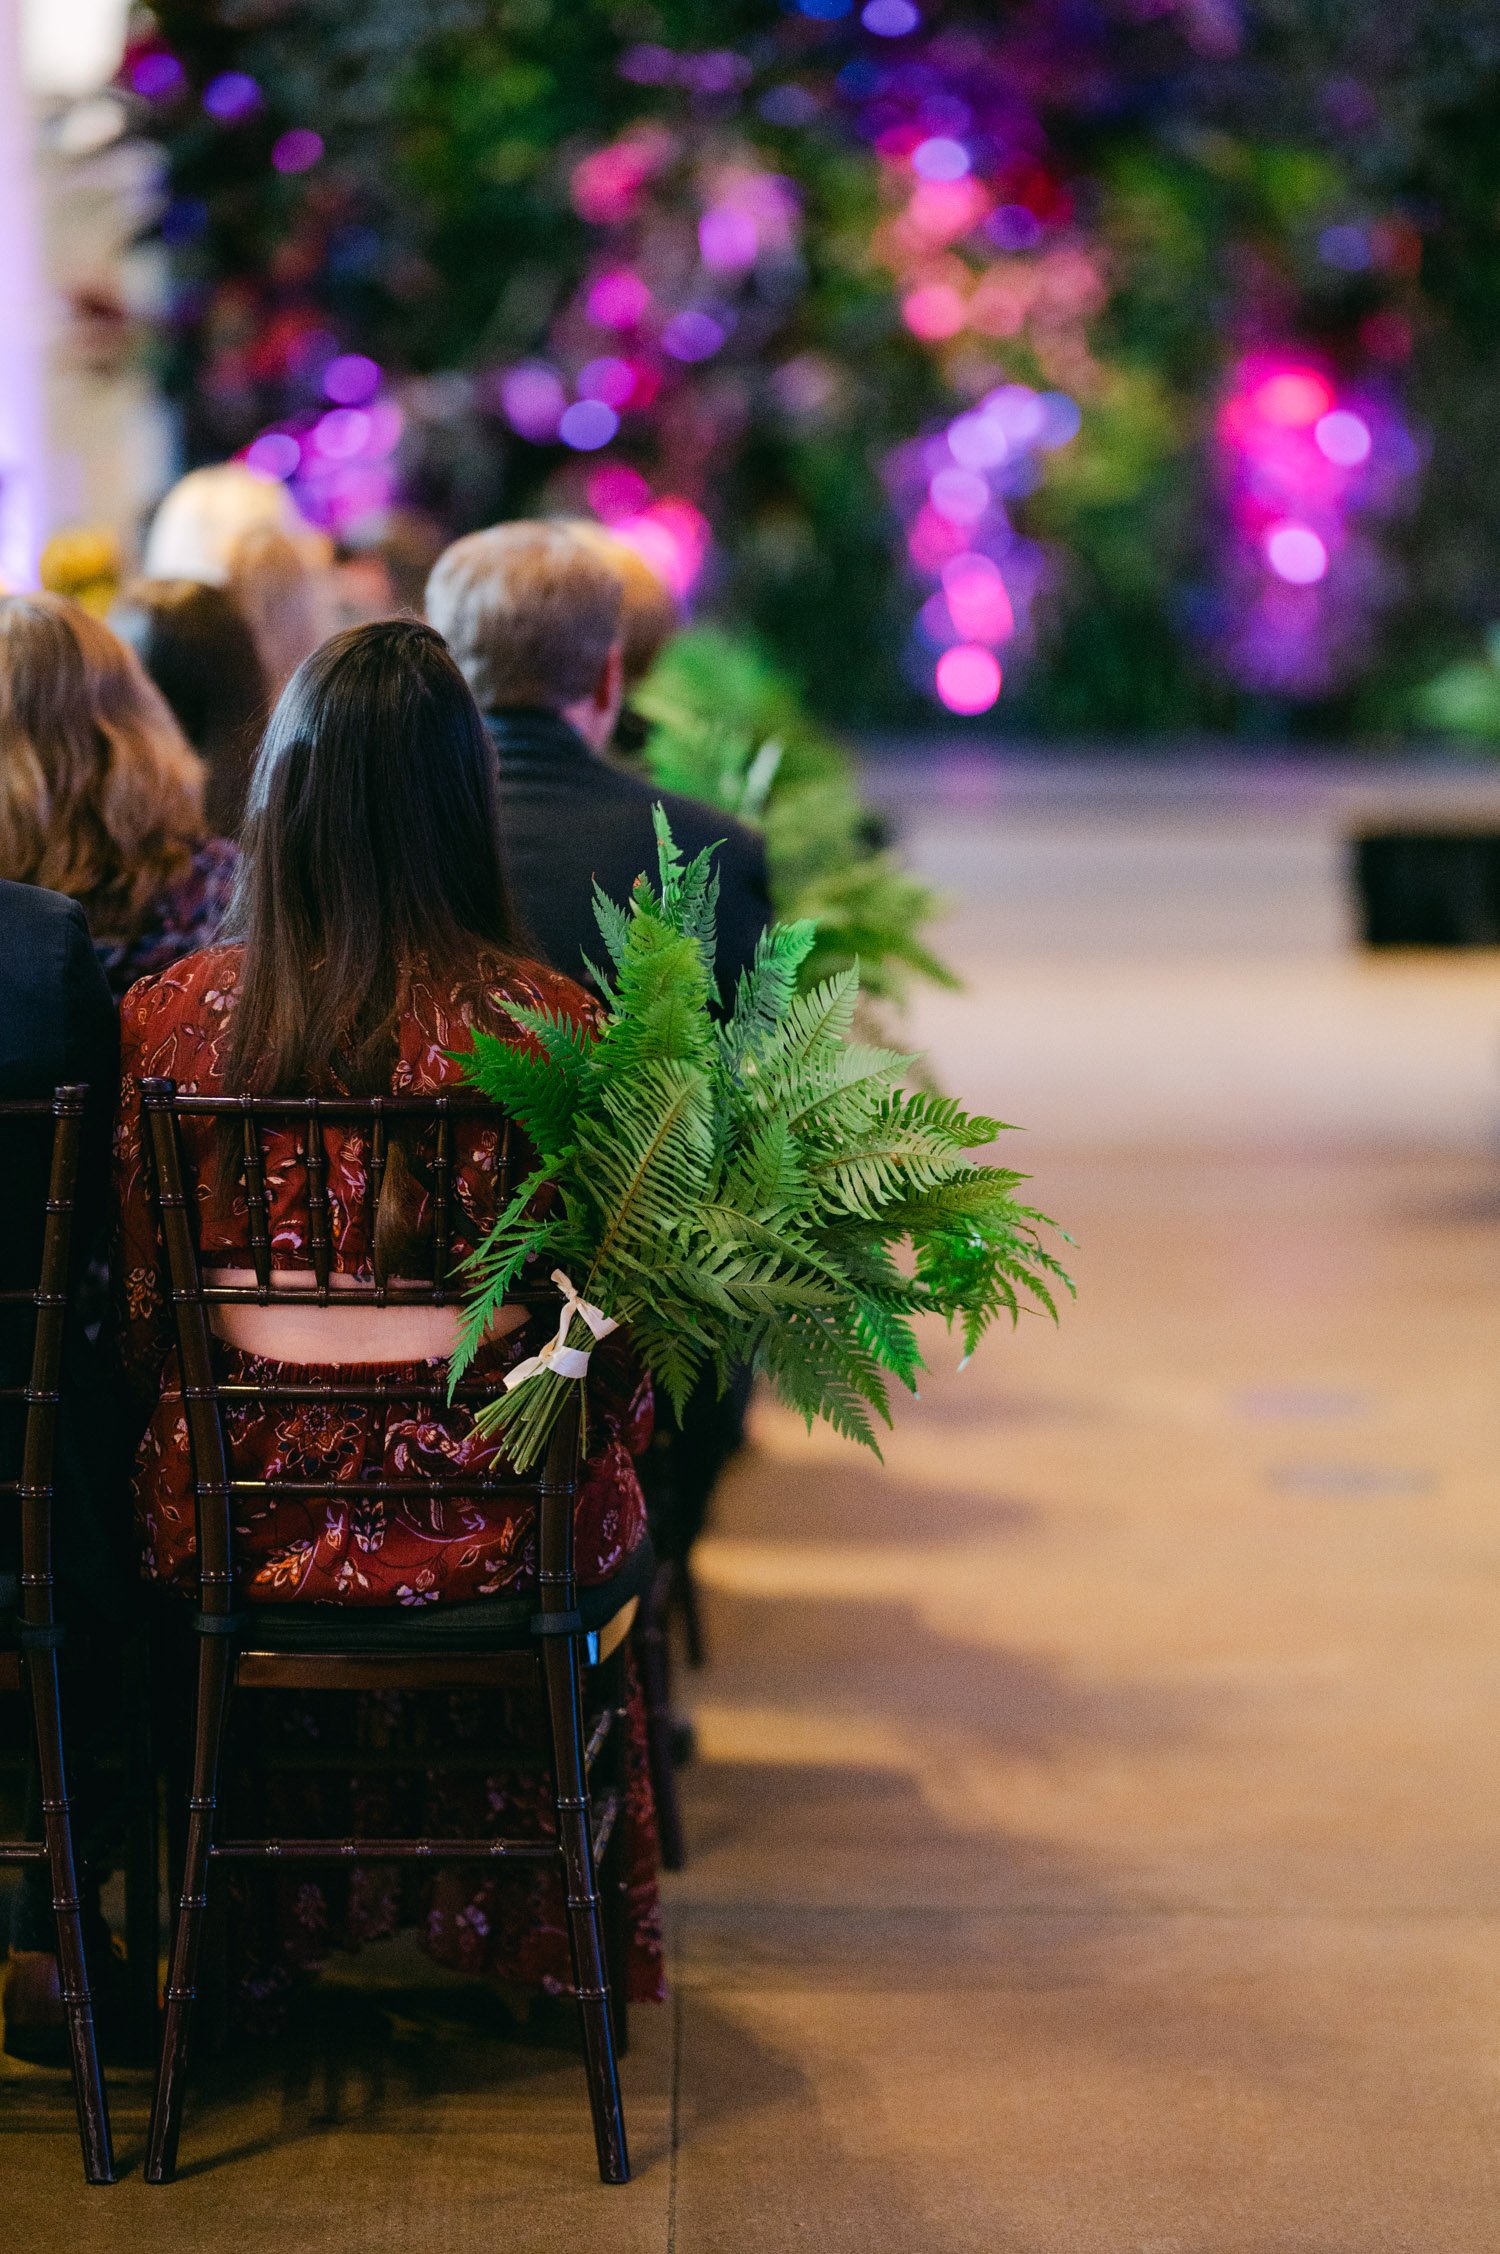 California academy of Sciences in San Francisco Wedding, photo of the wedding seat decor with plants